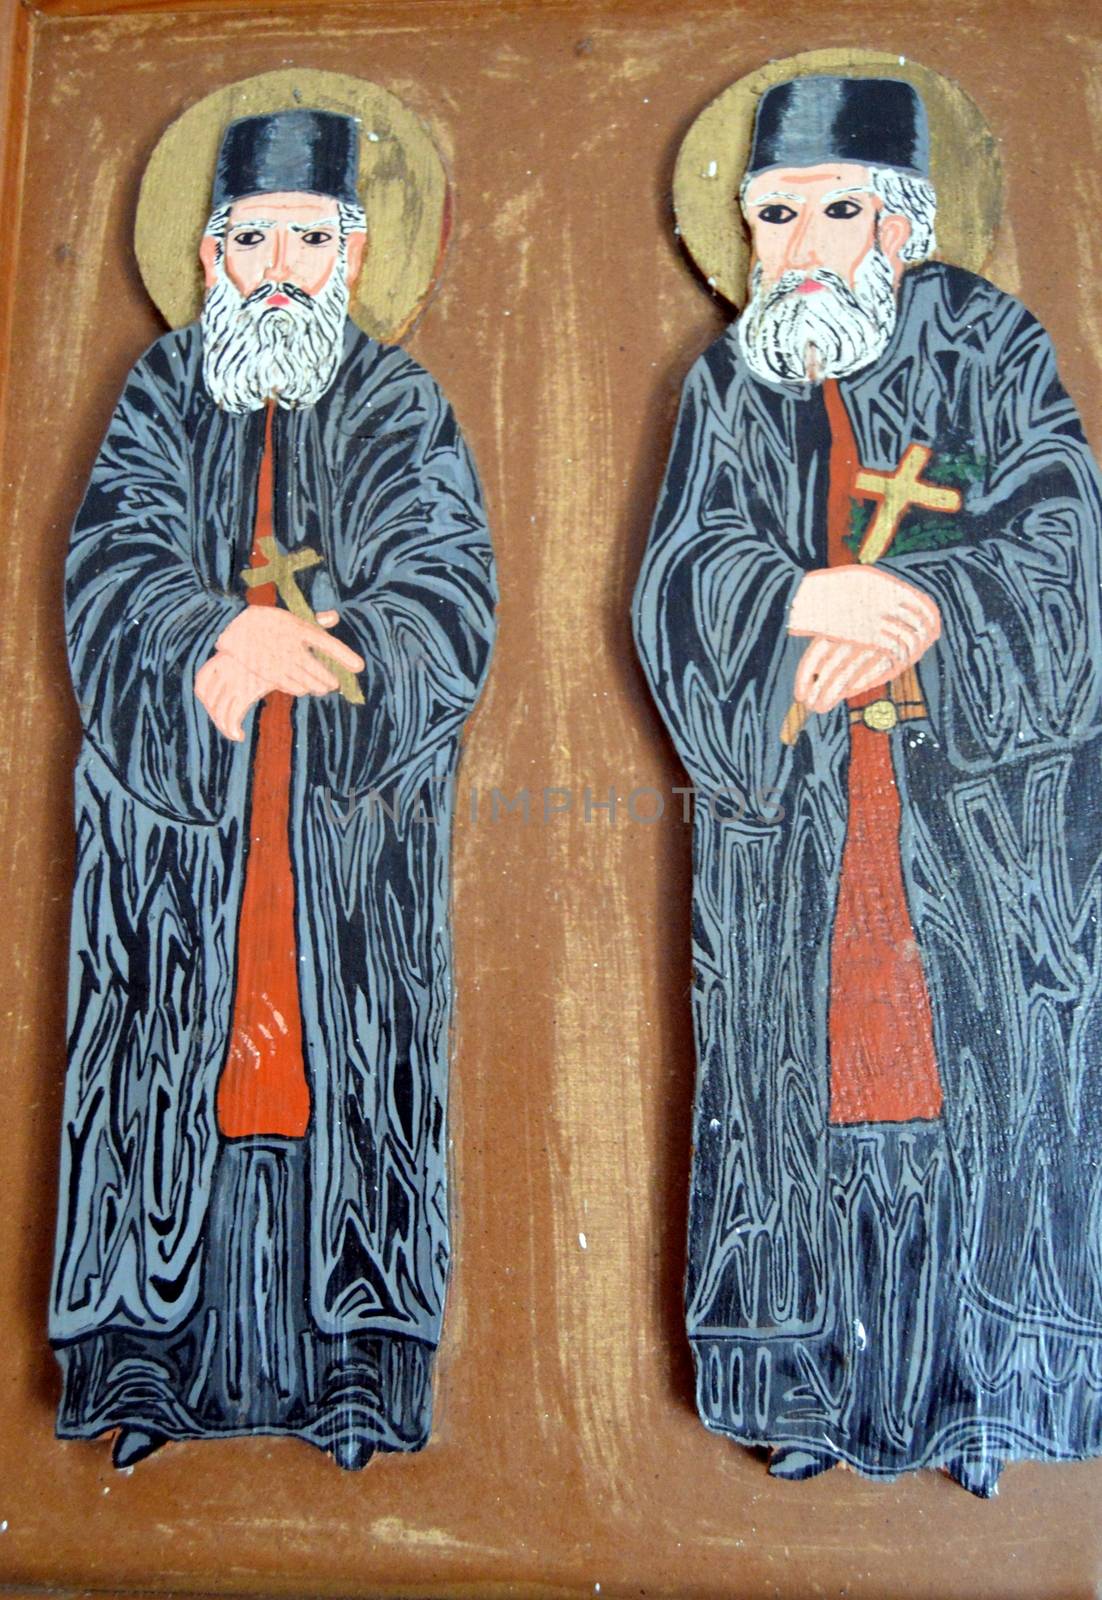 Two popes Greek orthodox paints relief on a picture.